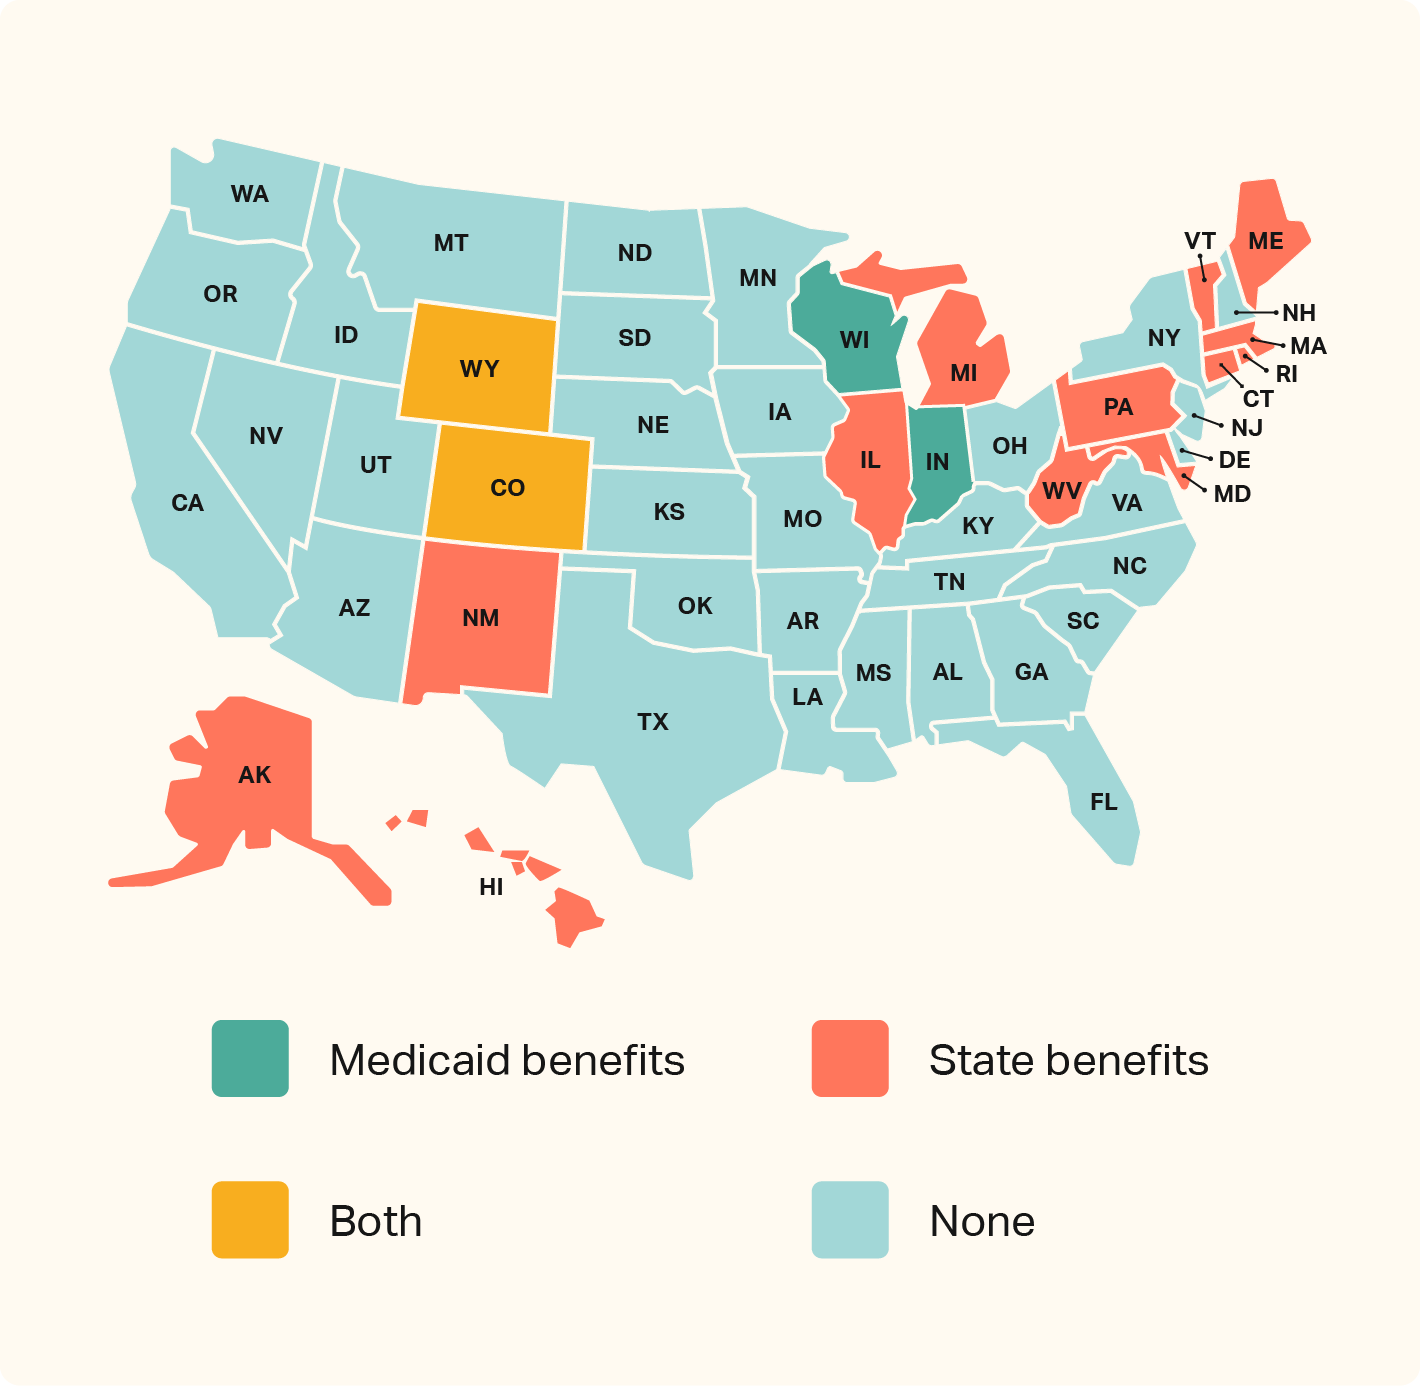 A color-coded U.S. map indicated which states have Medicaid benefits, state benefits, both, or neither. 